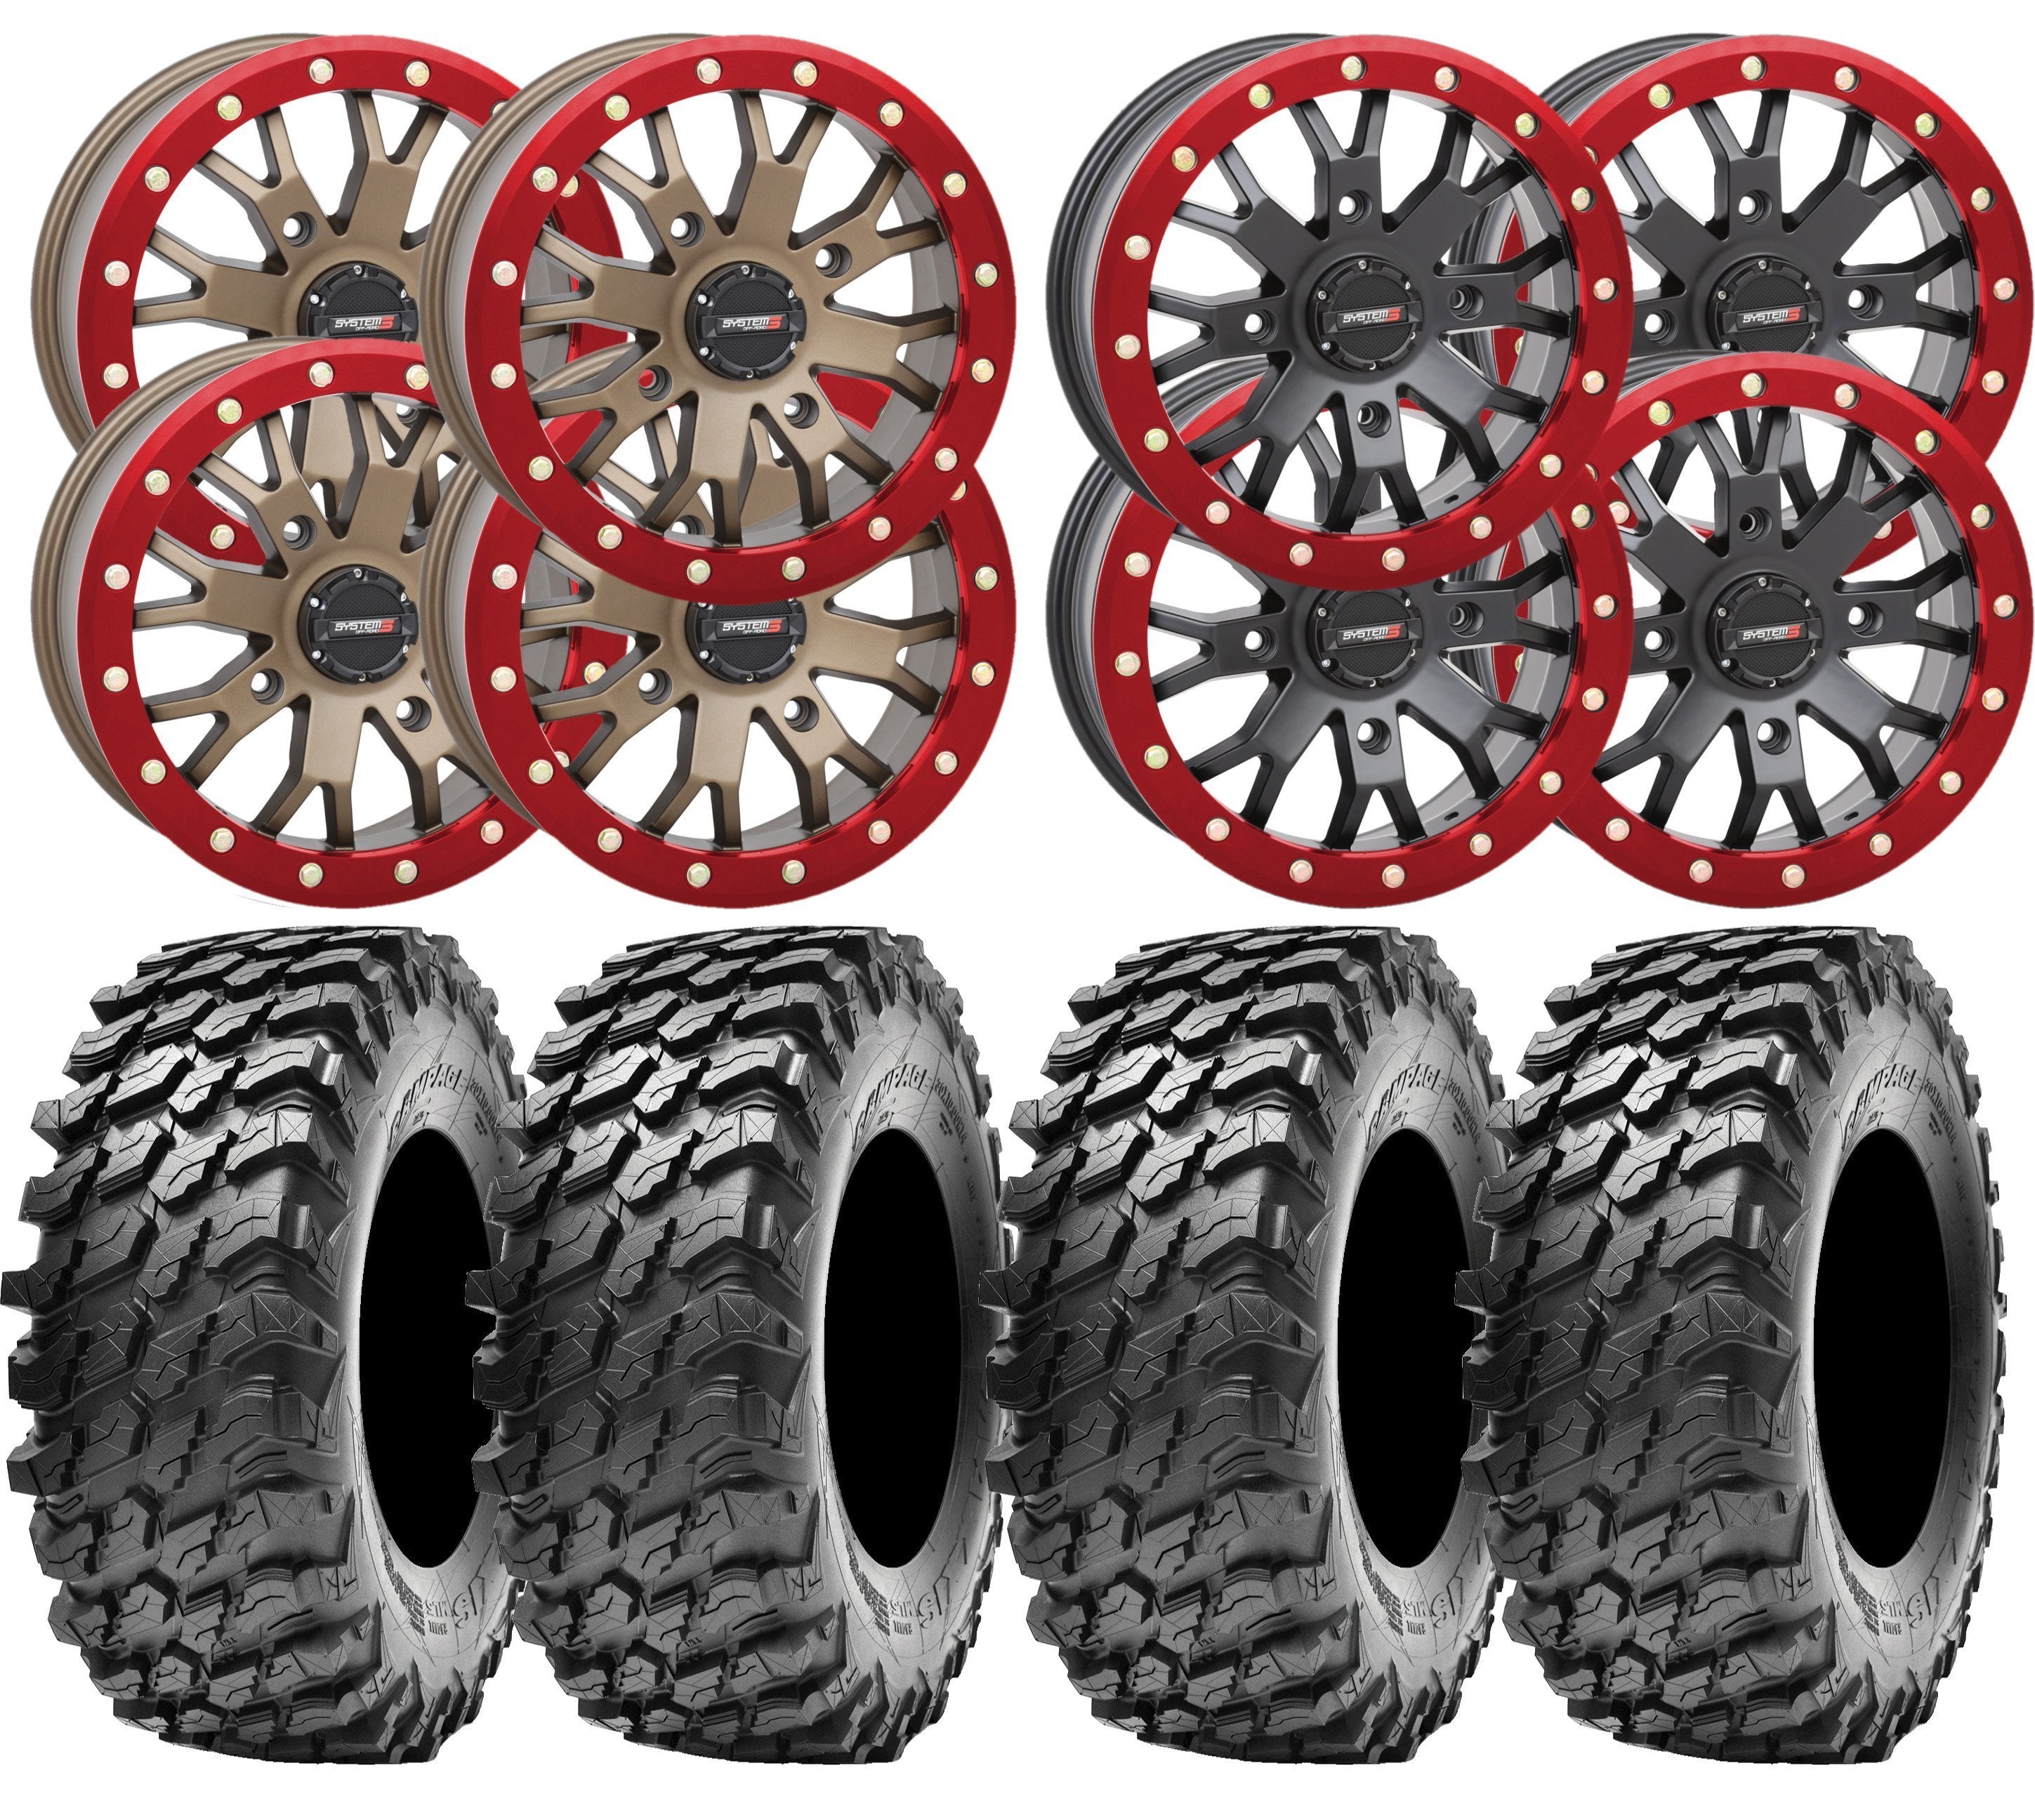 System3 SB and Maxxis Rampage UTV Wheel and Tire Kit w/ custom Red R – 